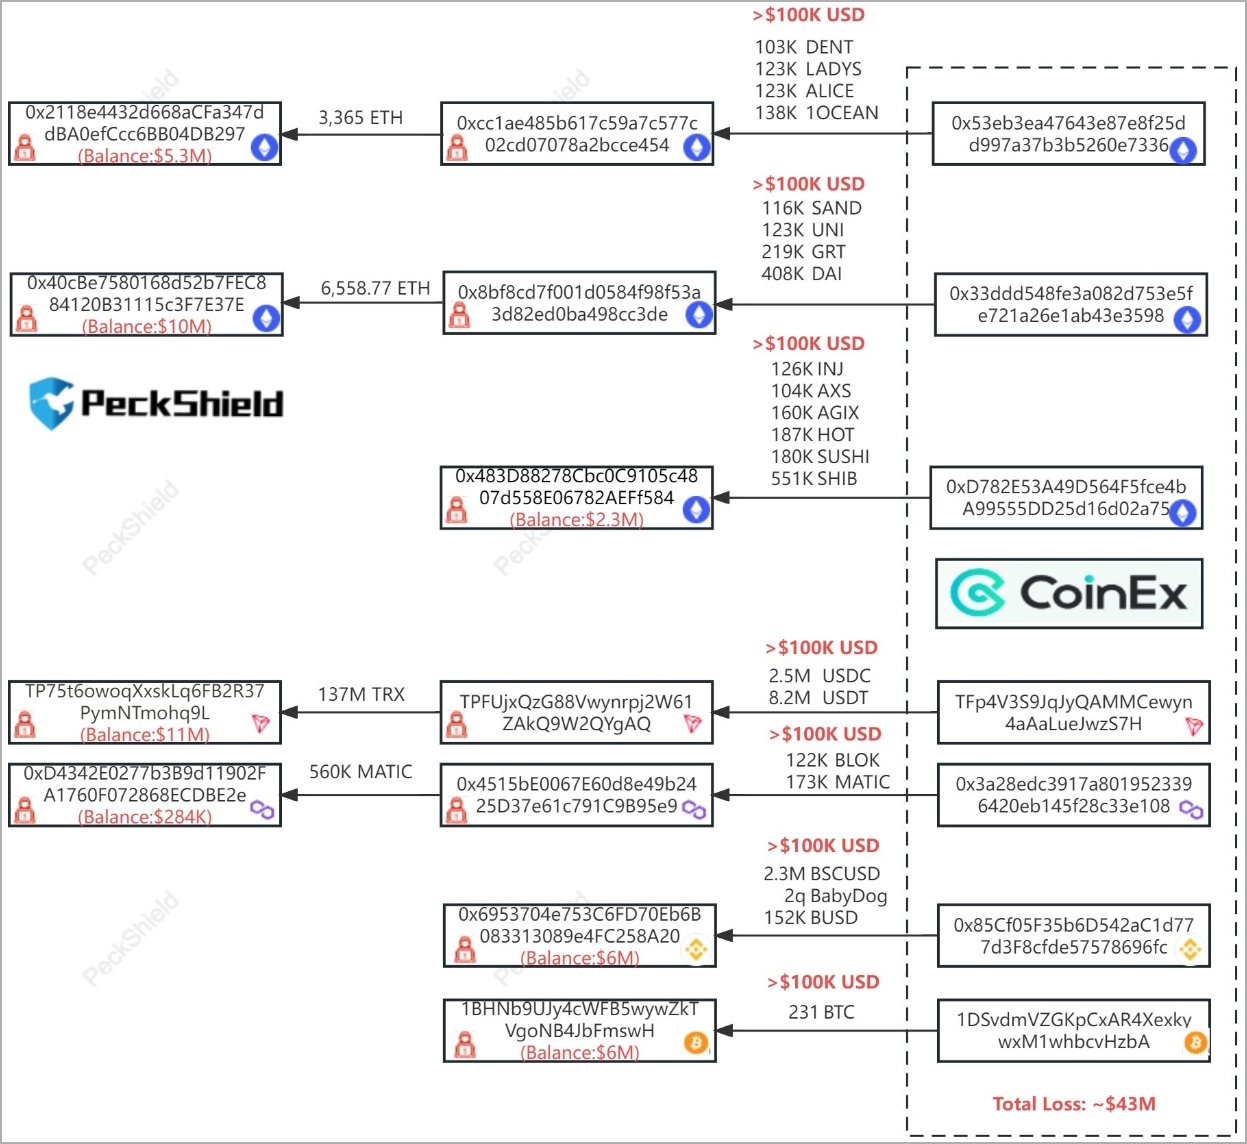 Tracked CoinEx losses